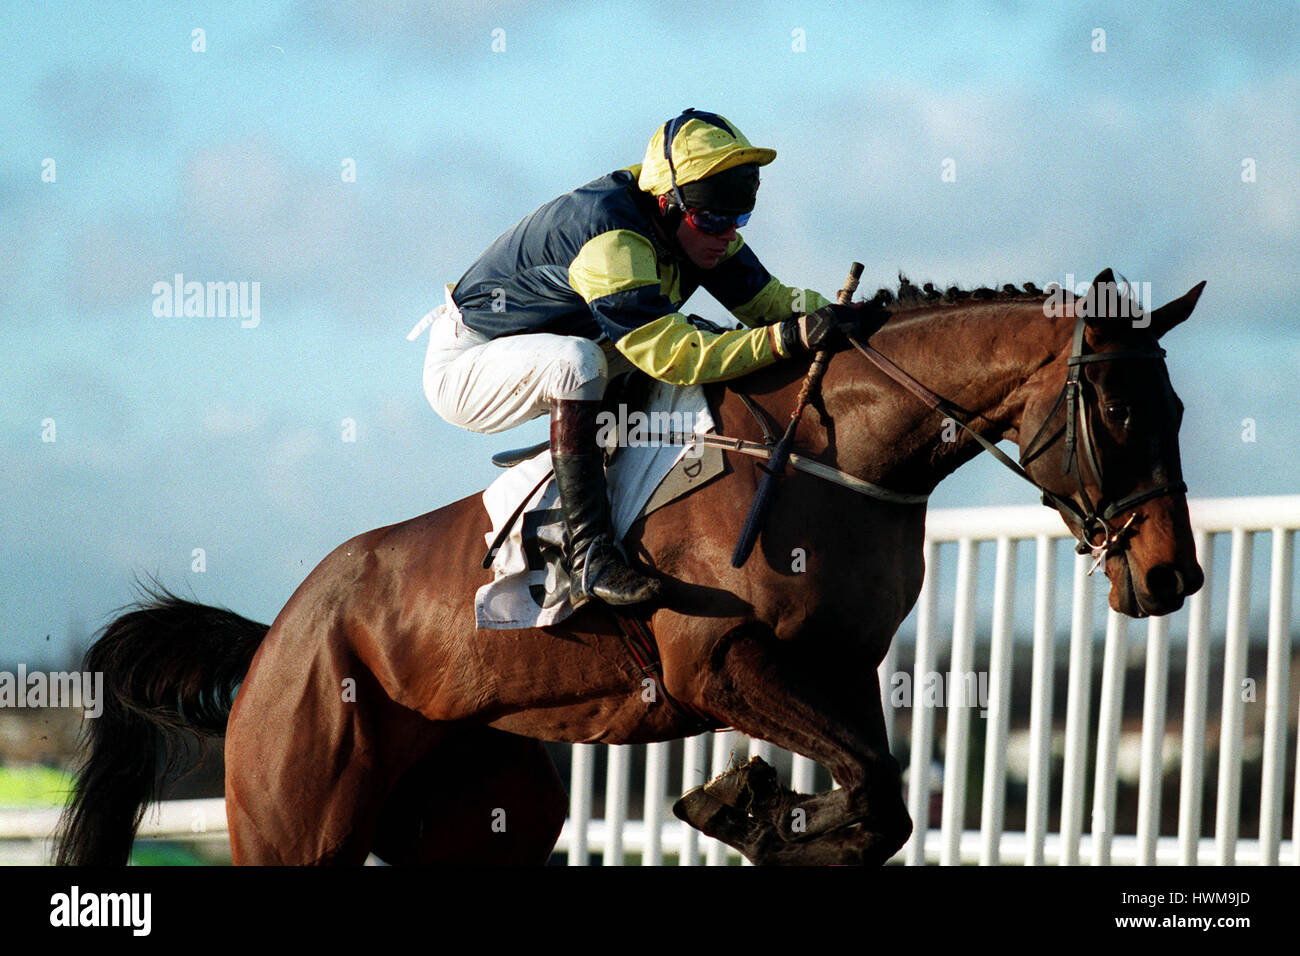 YOUNG THRUSTER RIDDEN BY CARL LLEWELLYN 25 January 1999 Stock Photo